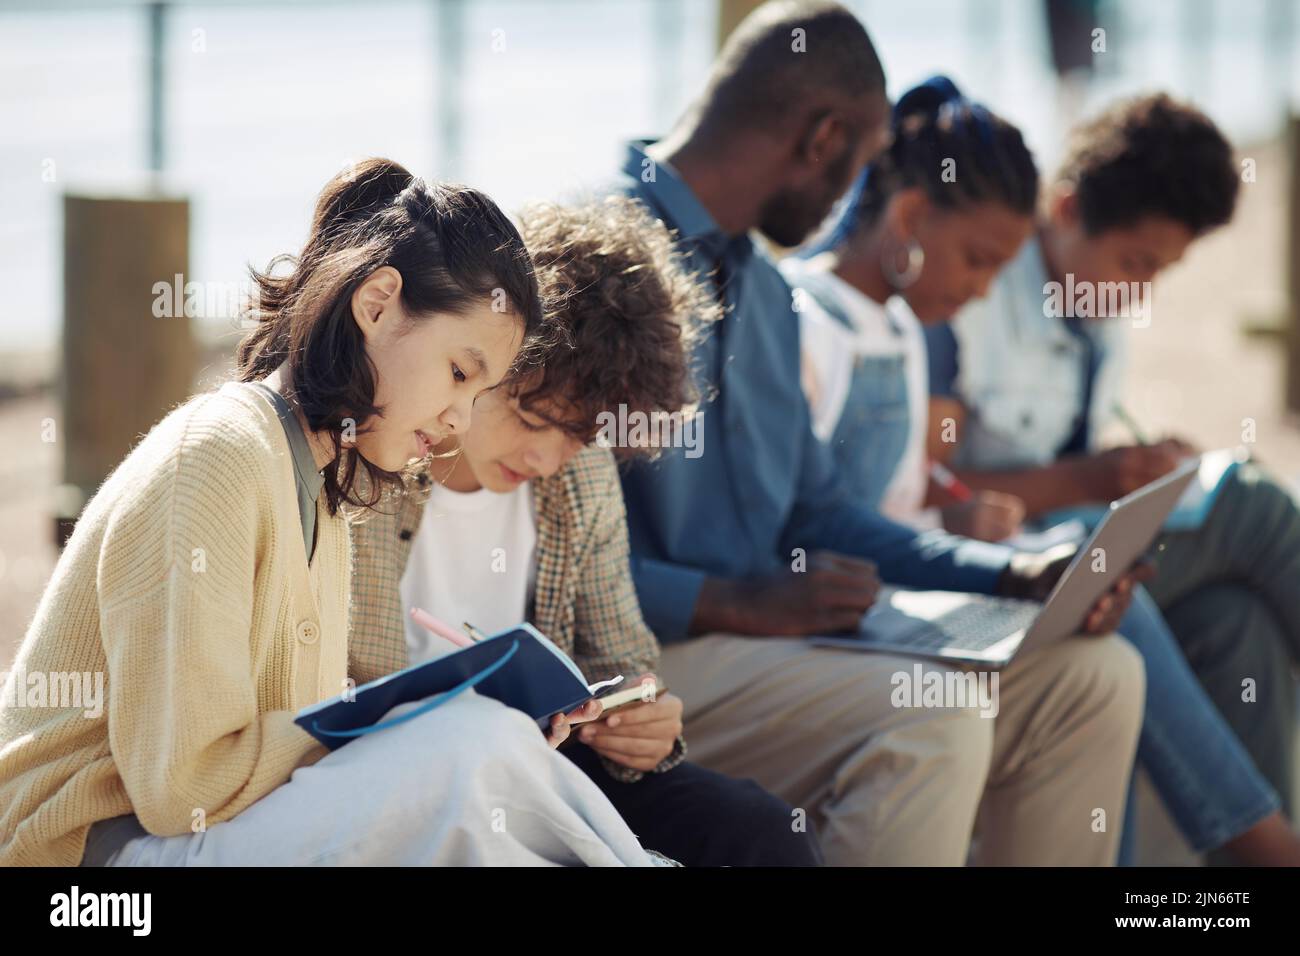 Diverse group of kids sitting in row and writing in notebooks outdoors during Summer school lesson Stock Photo